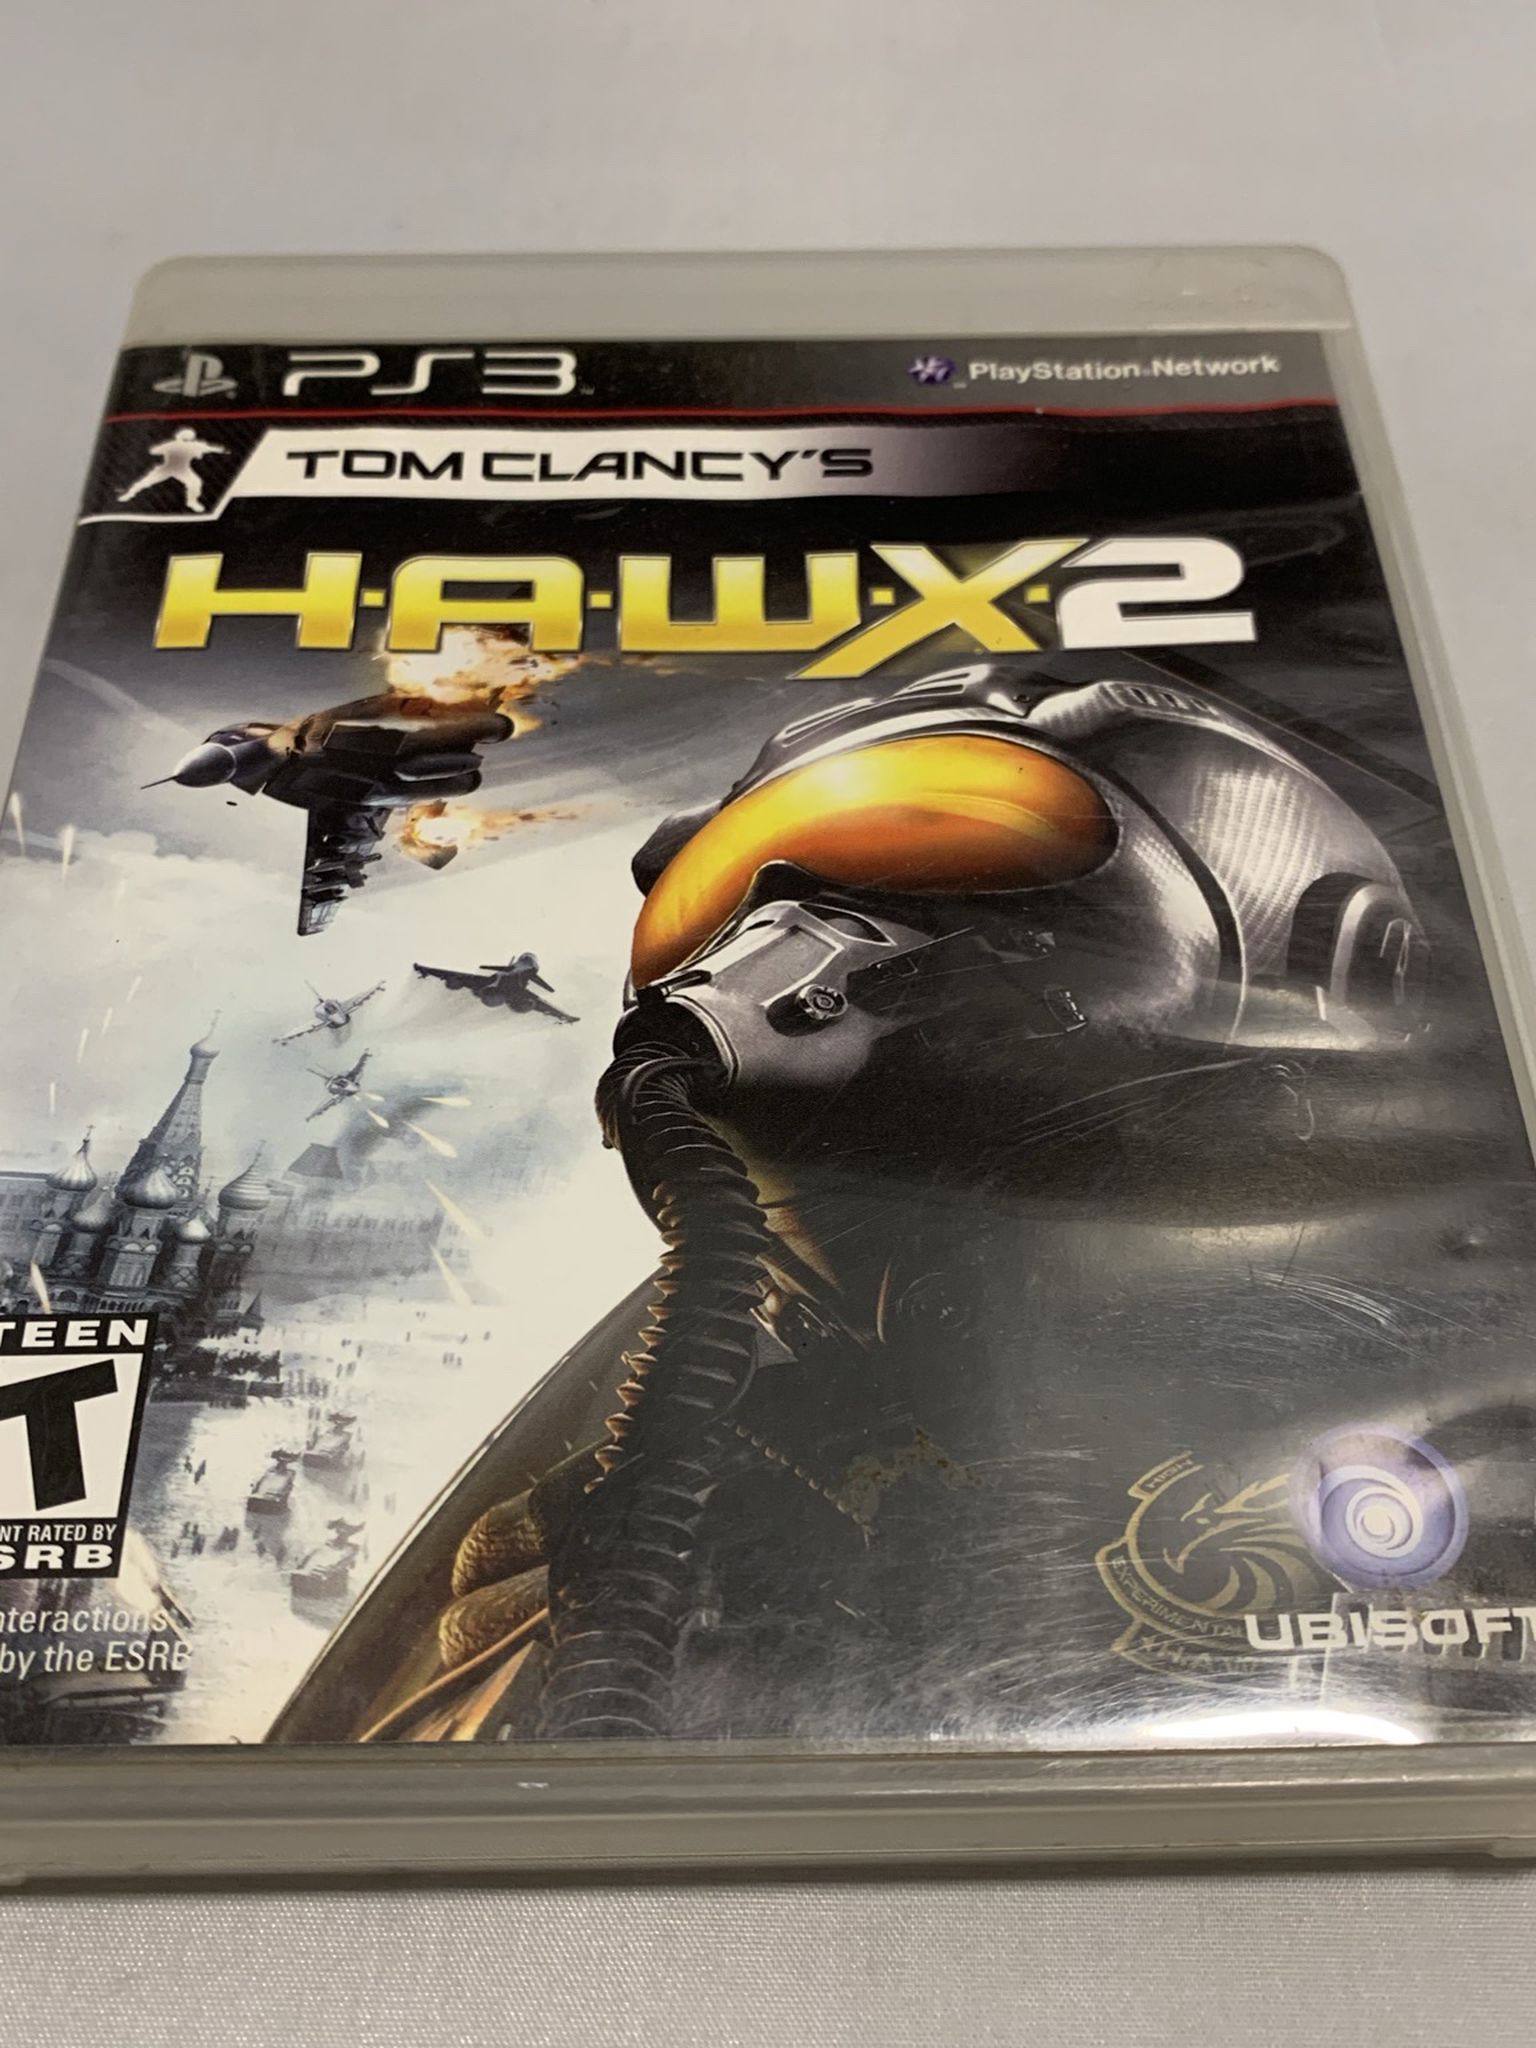 Tom Clancy’s H.A.W.X 2 For PlayStation 3 PS3 Complete CIB Video Game